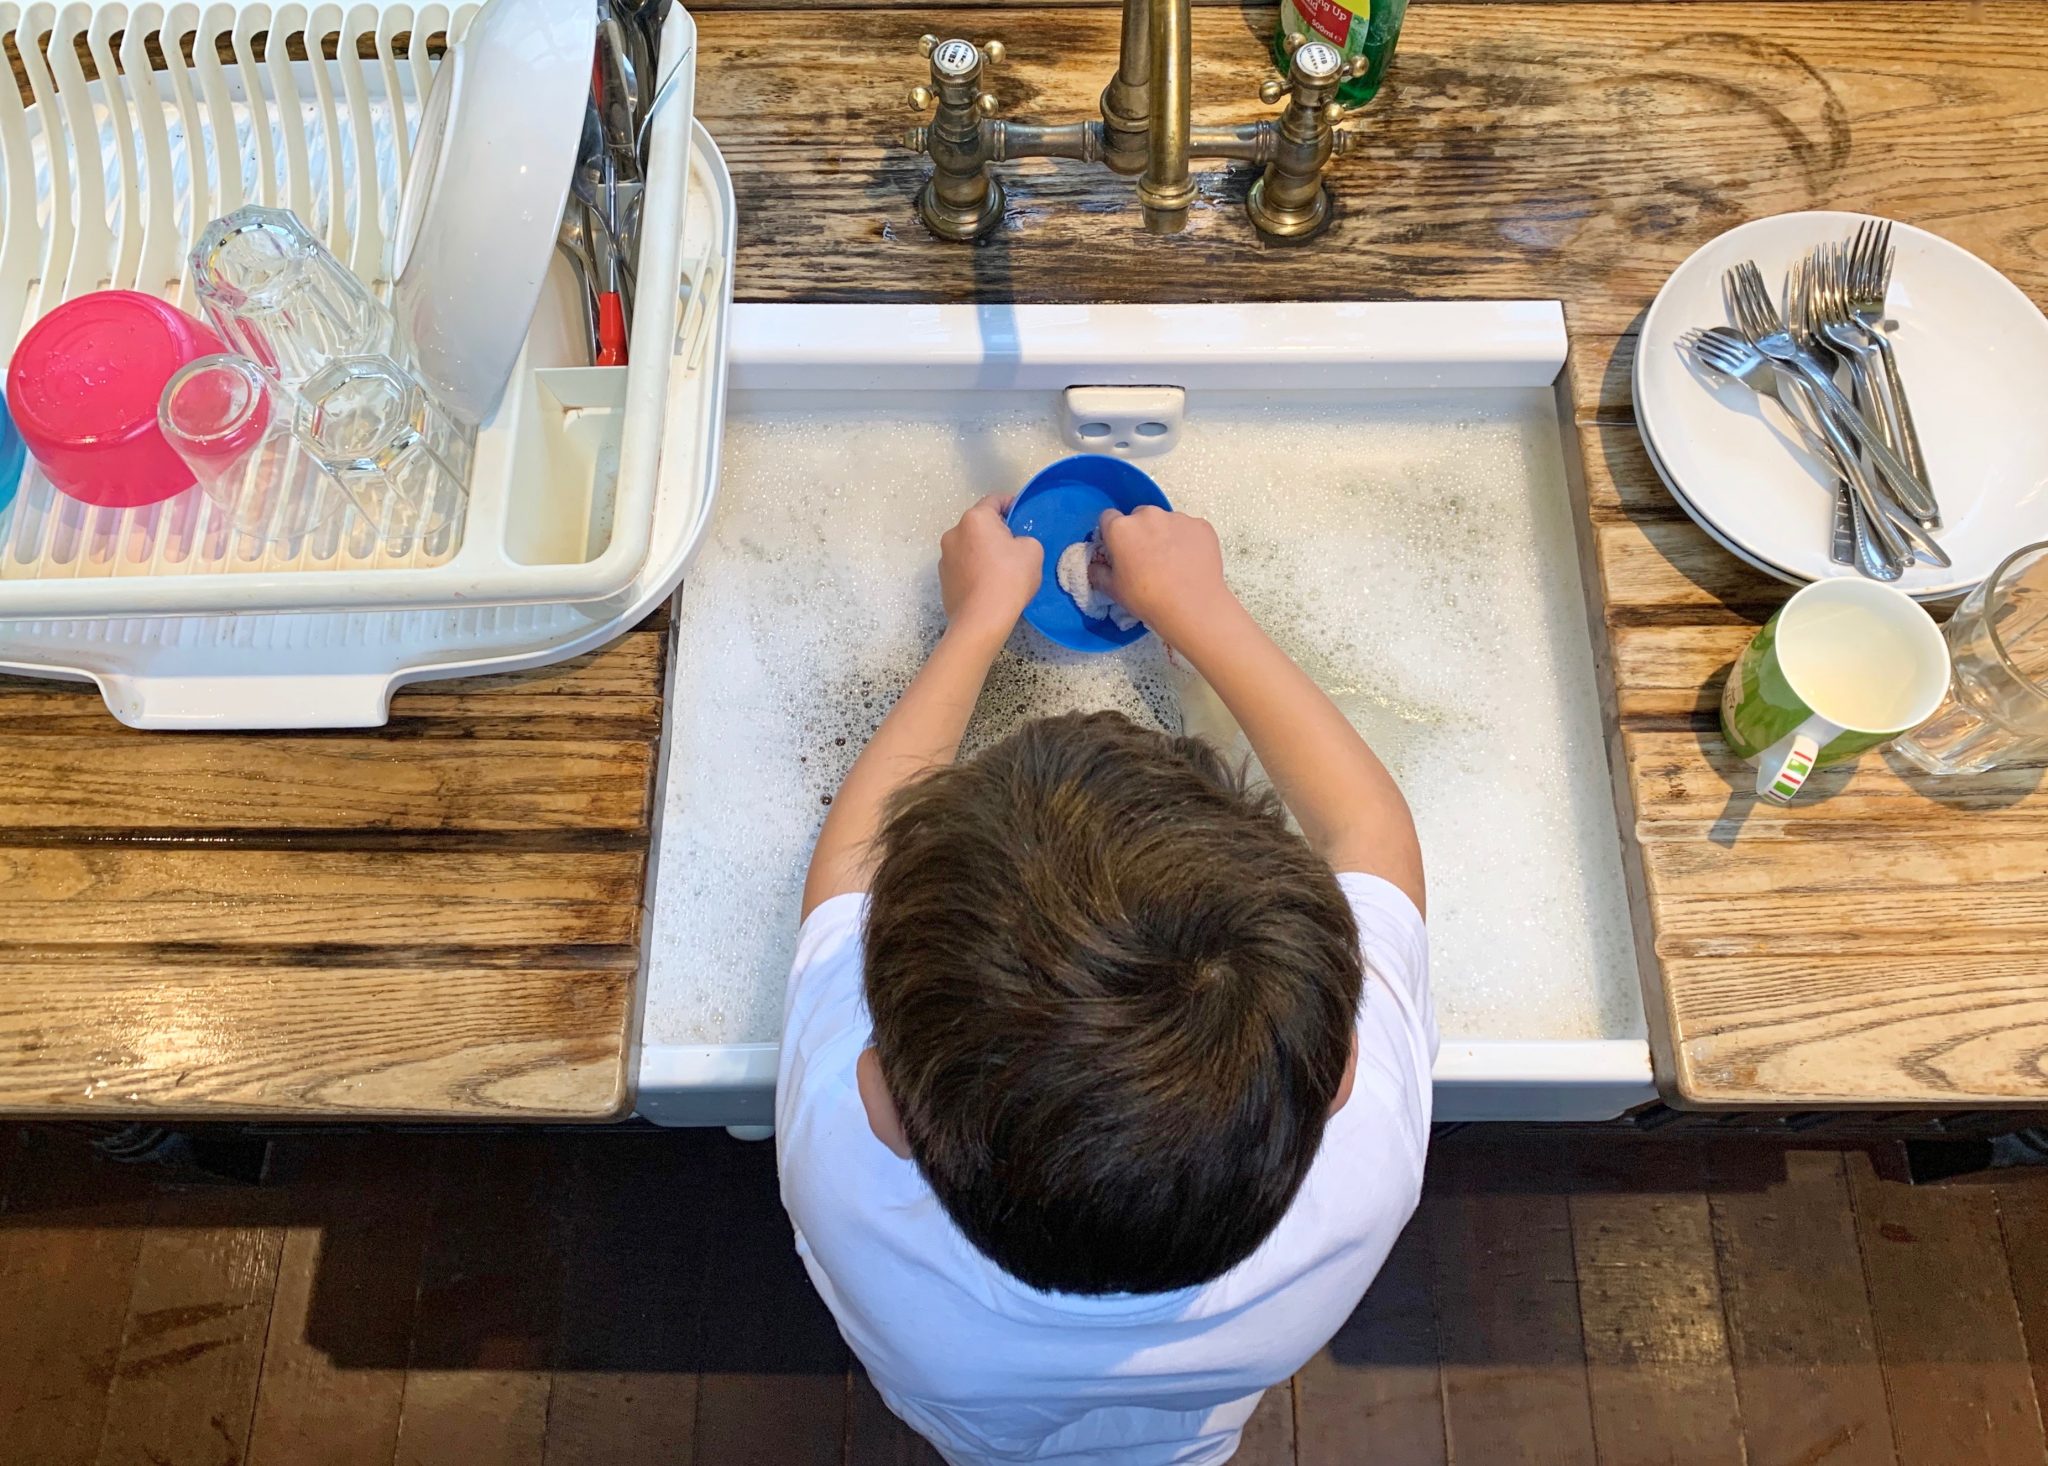 Research says children who do chores become successful adults